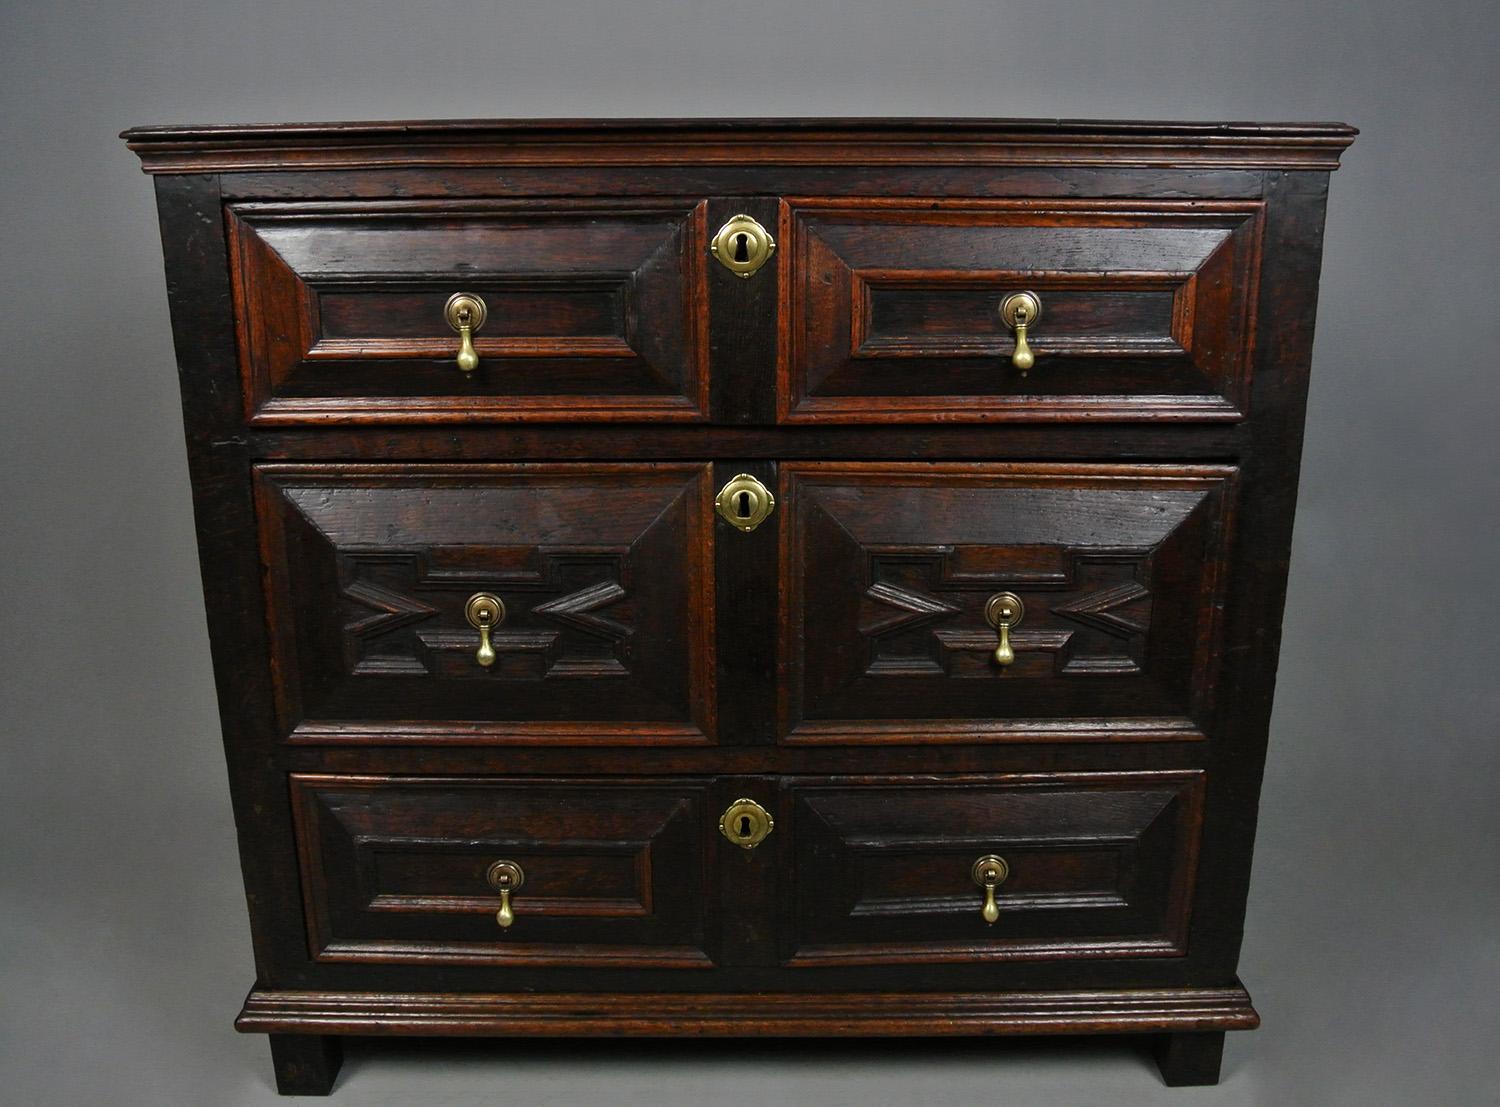 A really good and original solid oak 17th Century English chest of drawers with bolection moulded drawers and original hand cast brass drop handles. The three long drawers with rebated runners and retaining their original linings of substantial oak